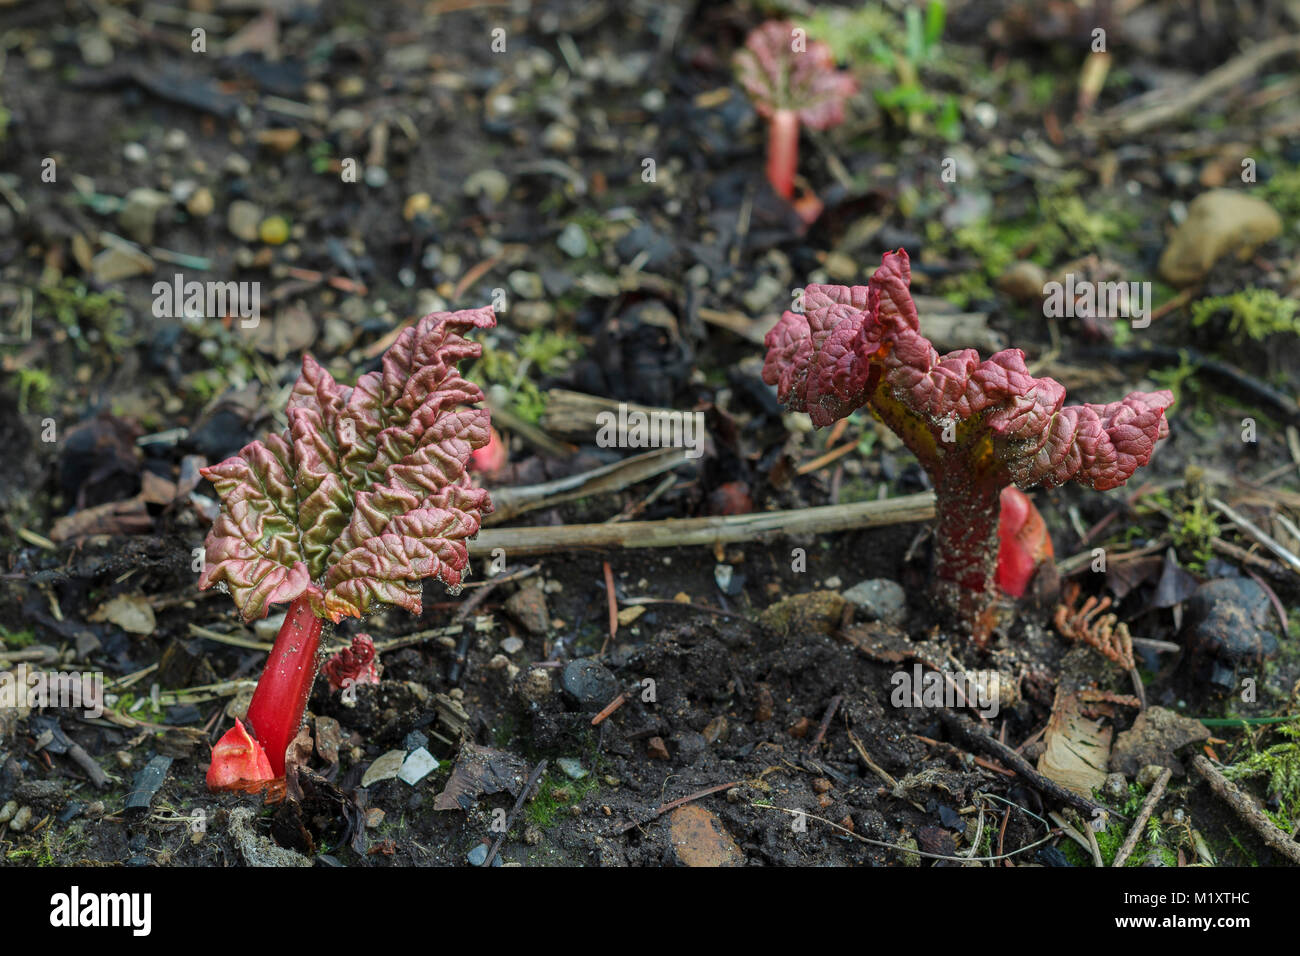 In a backyard garden in February, intense red buds and stems of rhubarb push up, with large, wrinkled leaves that are red when they first develop. Stock Photo